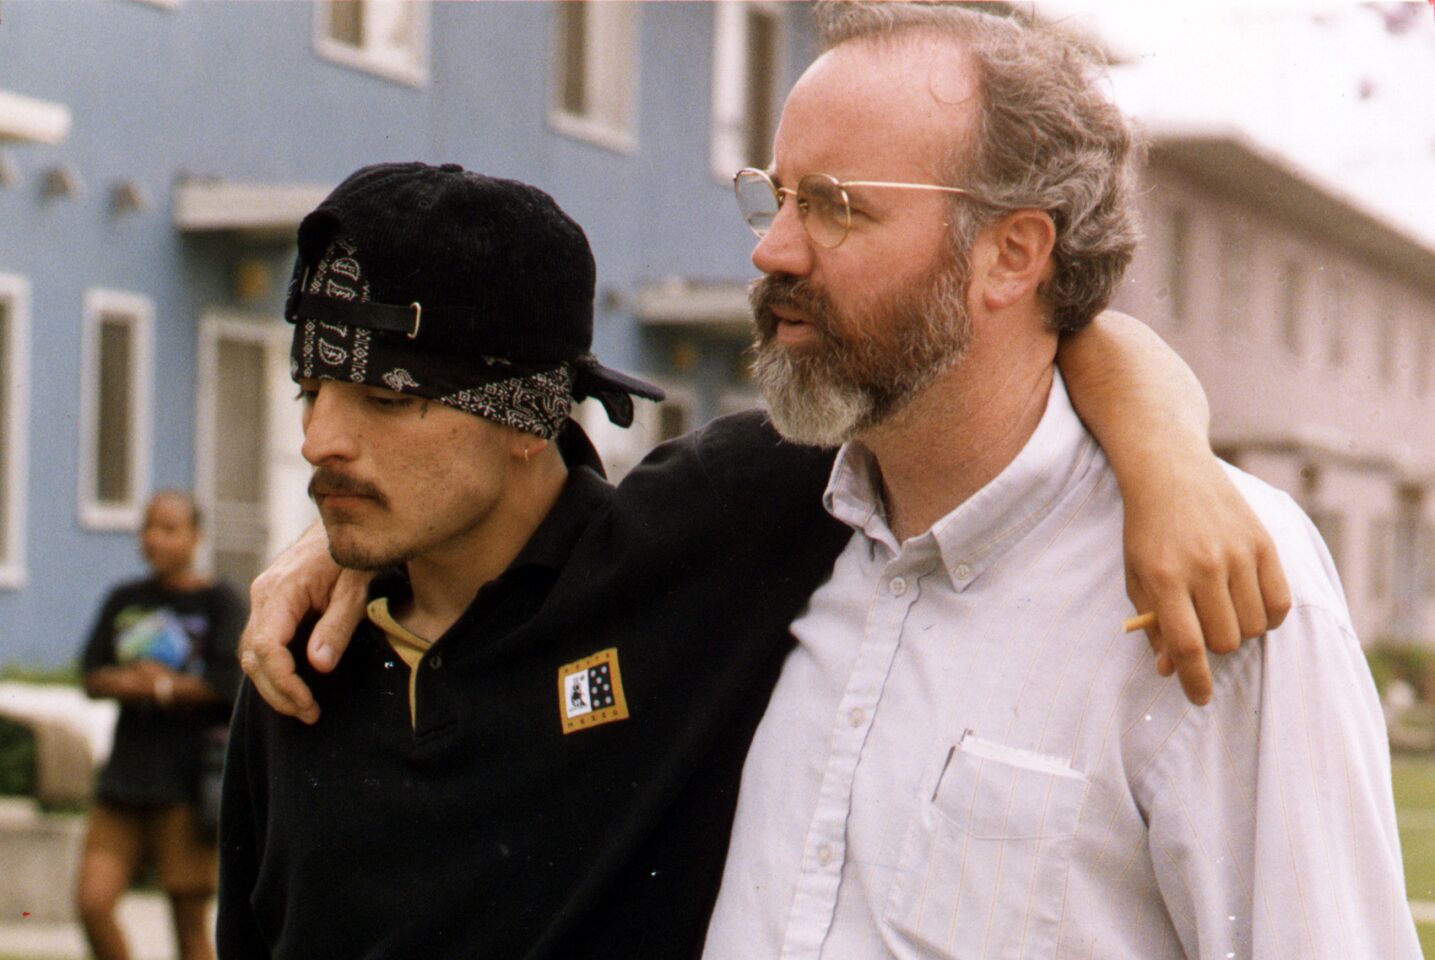 Boyle used to negotiate truces and peace treaties among warring gangs but stopped doing that years ago. Above, he meets with a gang member in March 1997.